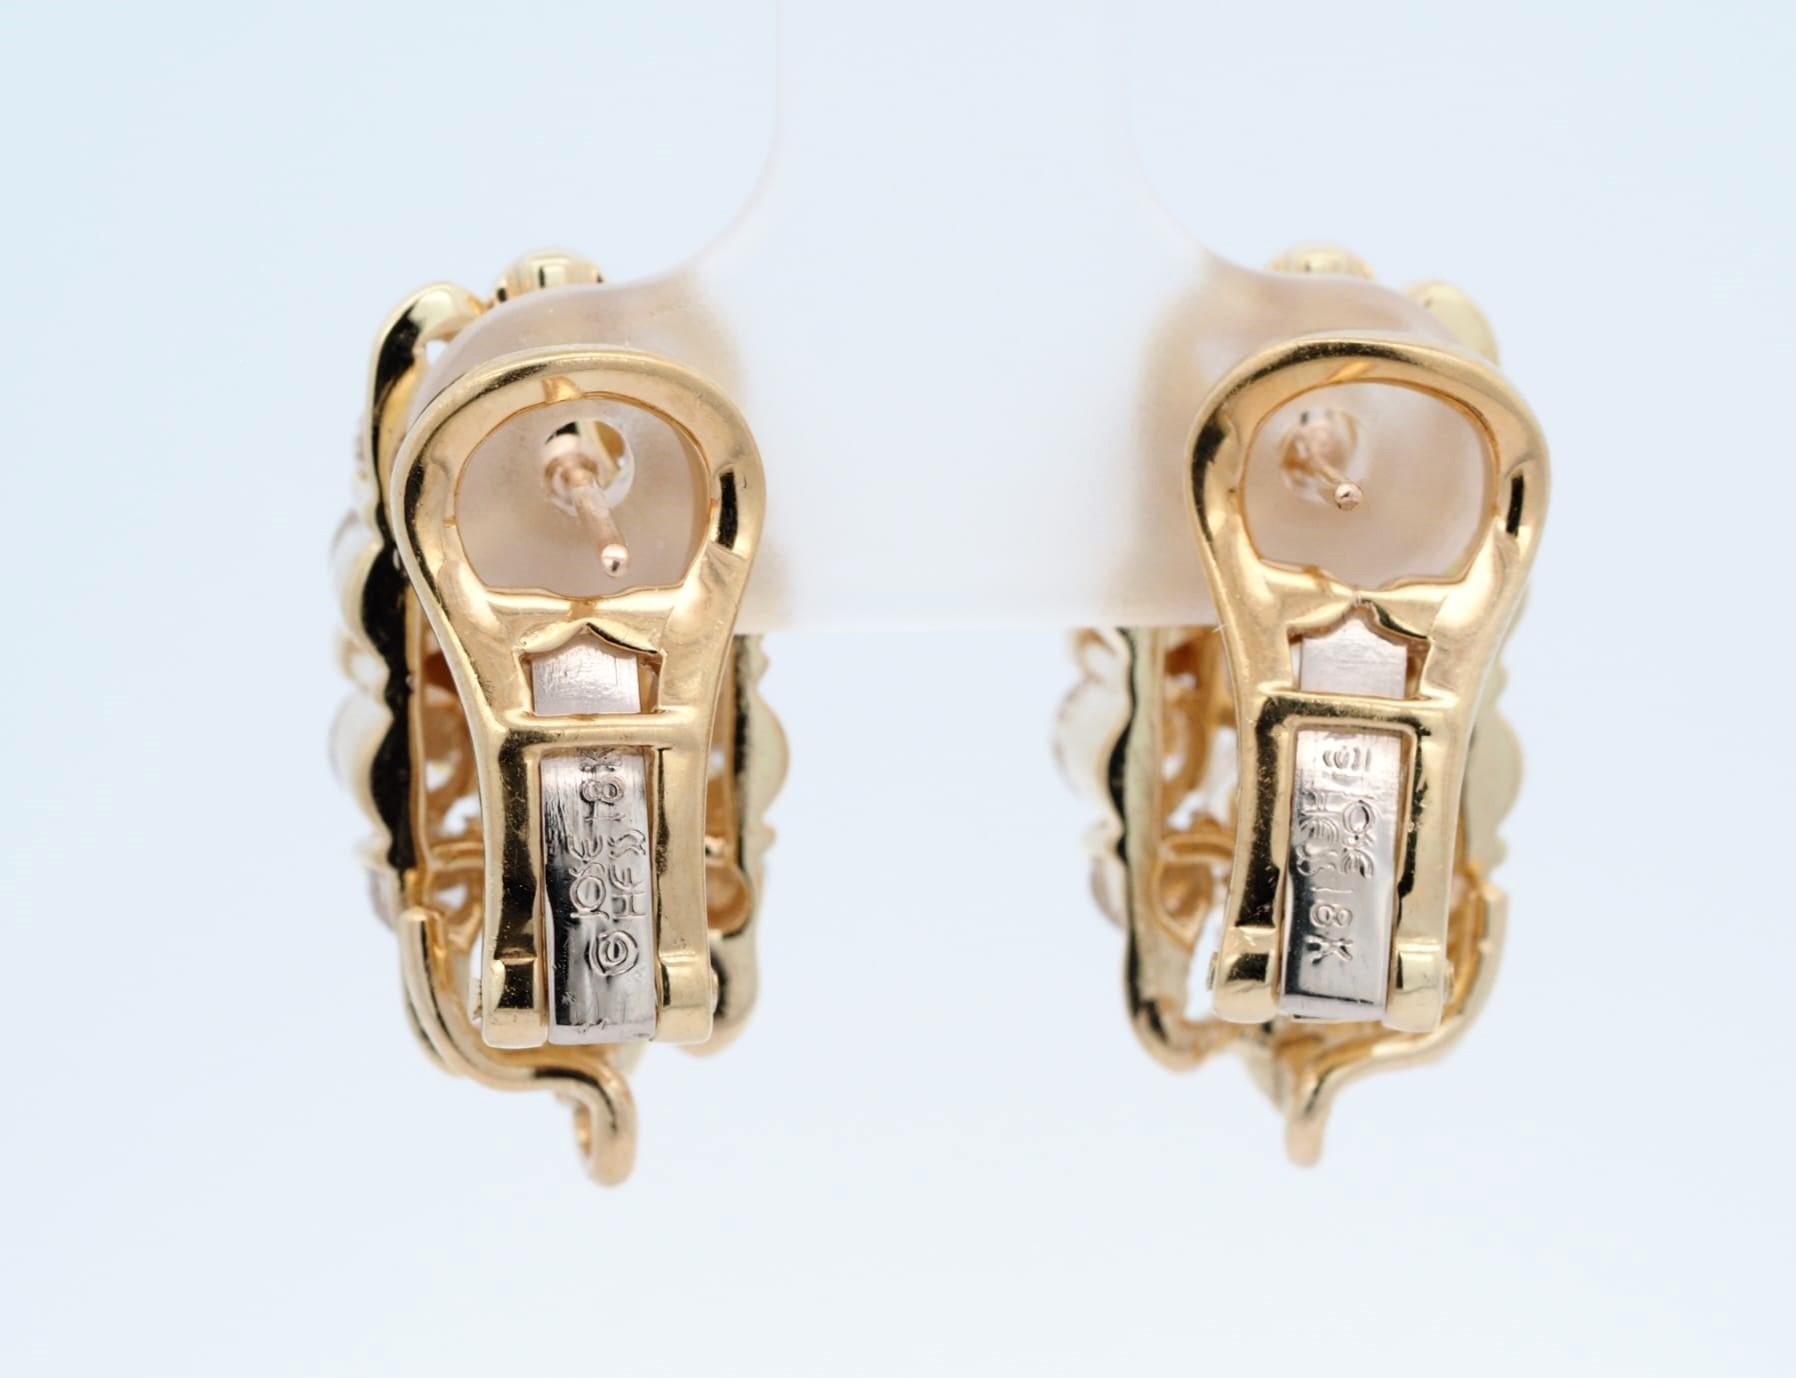 Jose Hess 18K Yellow Gold 3.4 ct Round Cut Diamond Earrings In Excellent Condition For Sale In Addison, TX